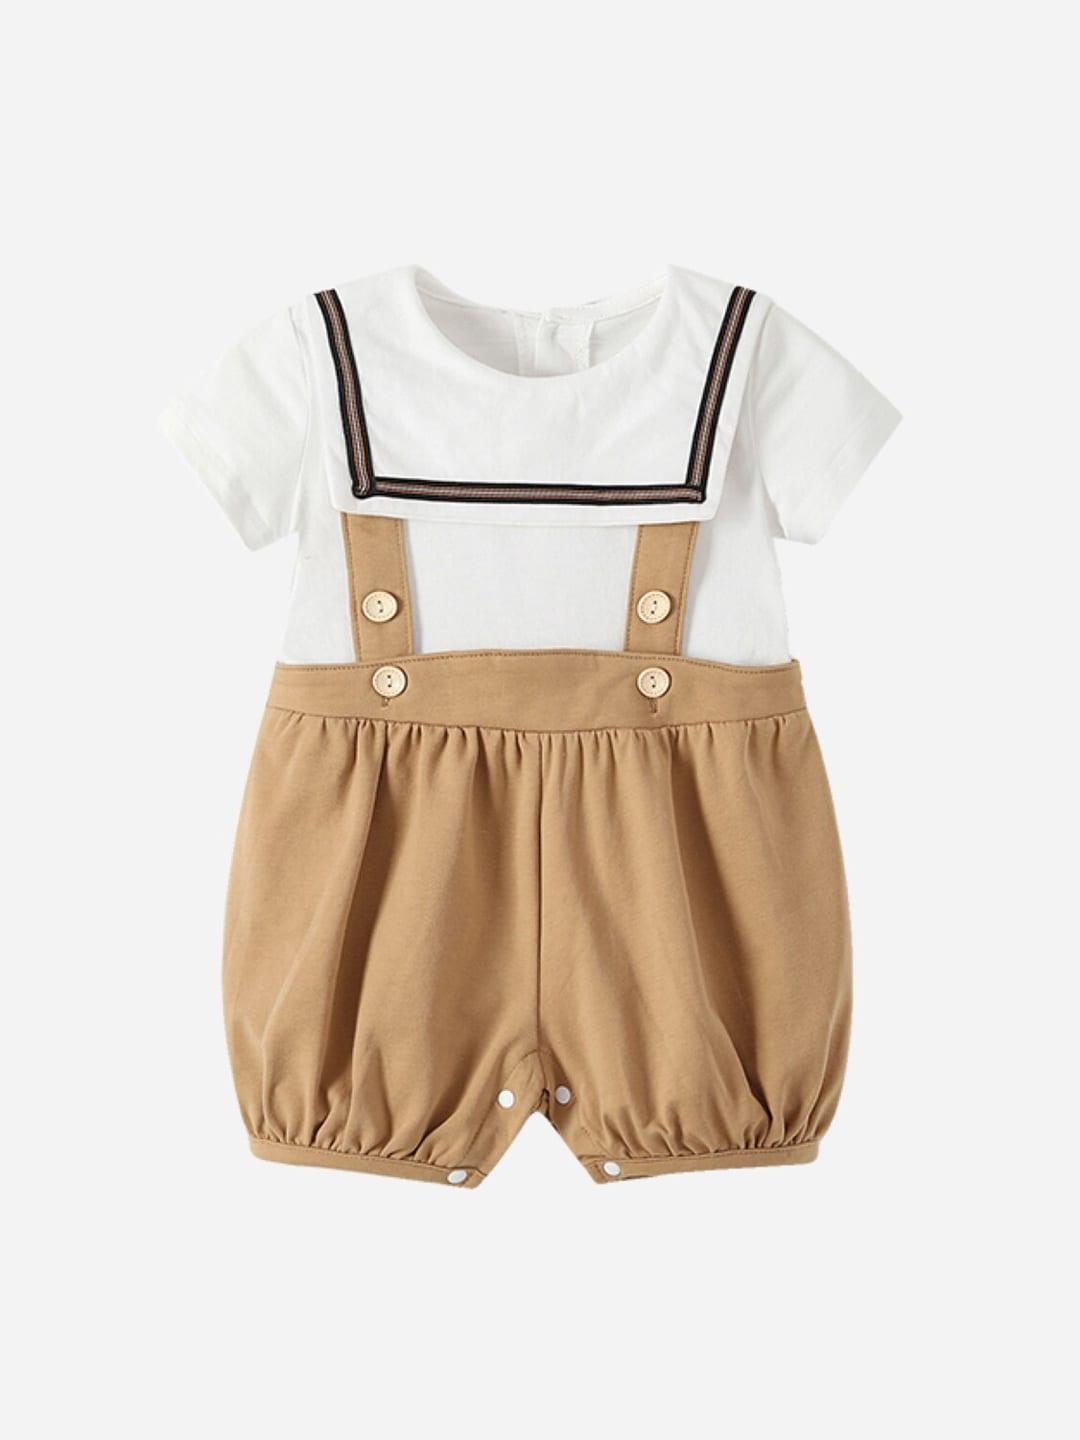 stylecast-infants-brown-round-neck-rompers